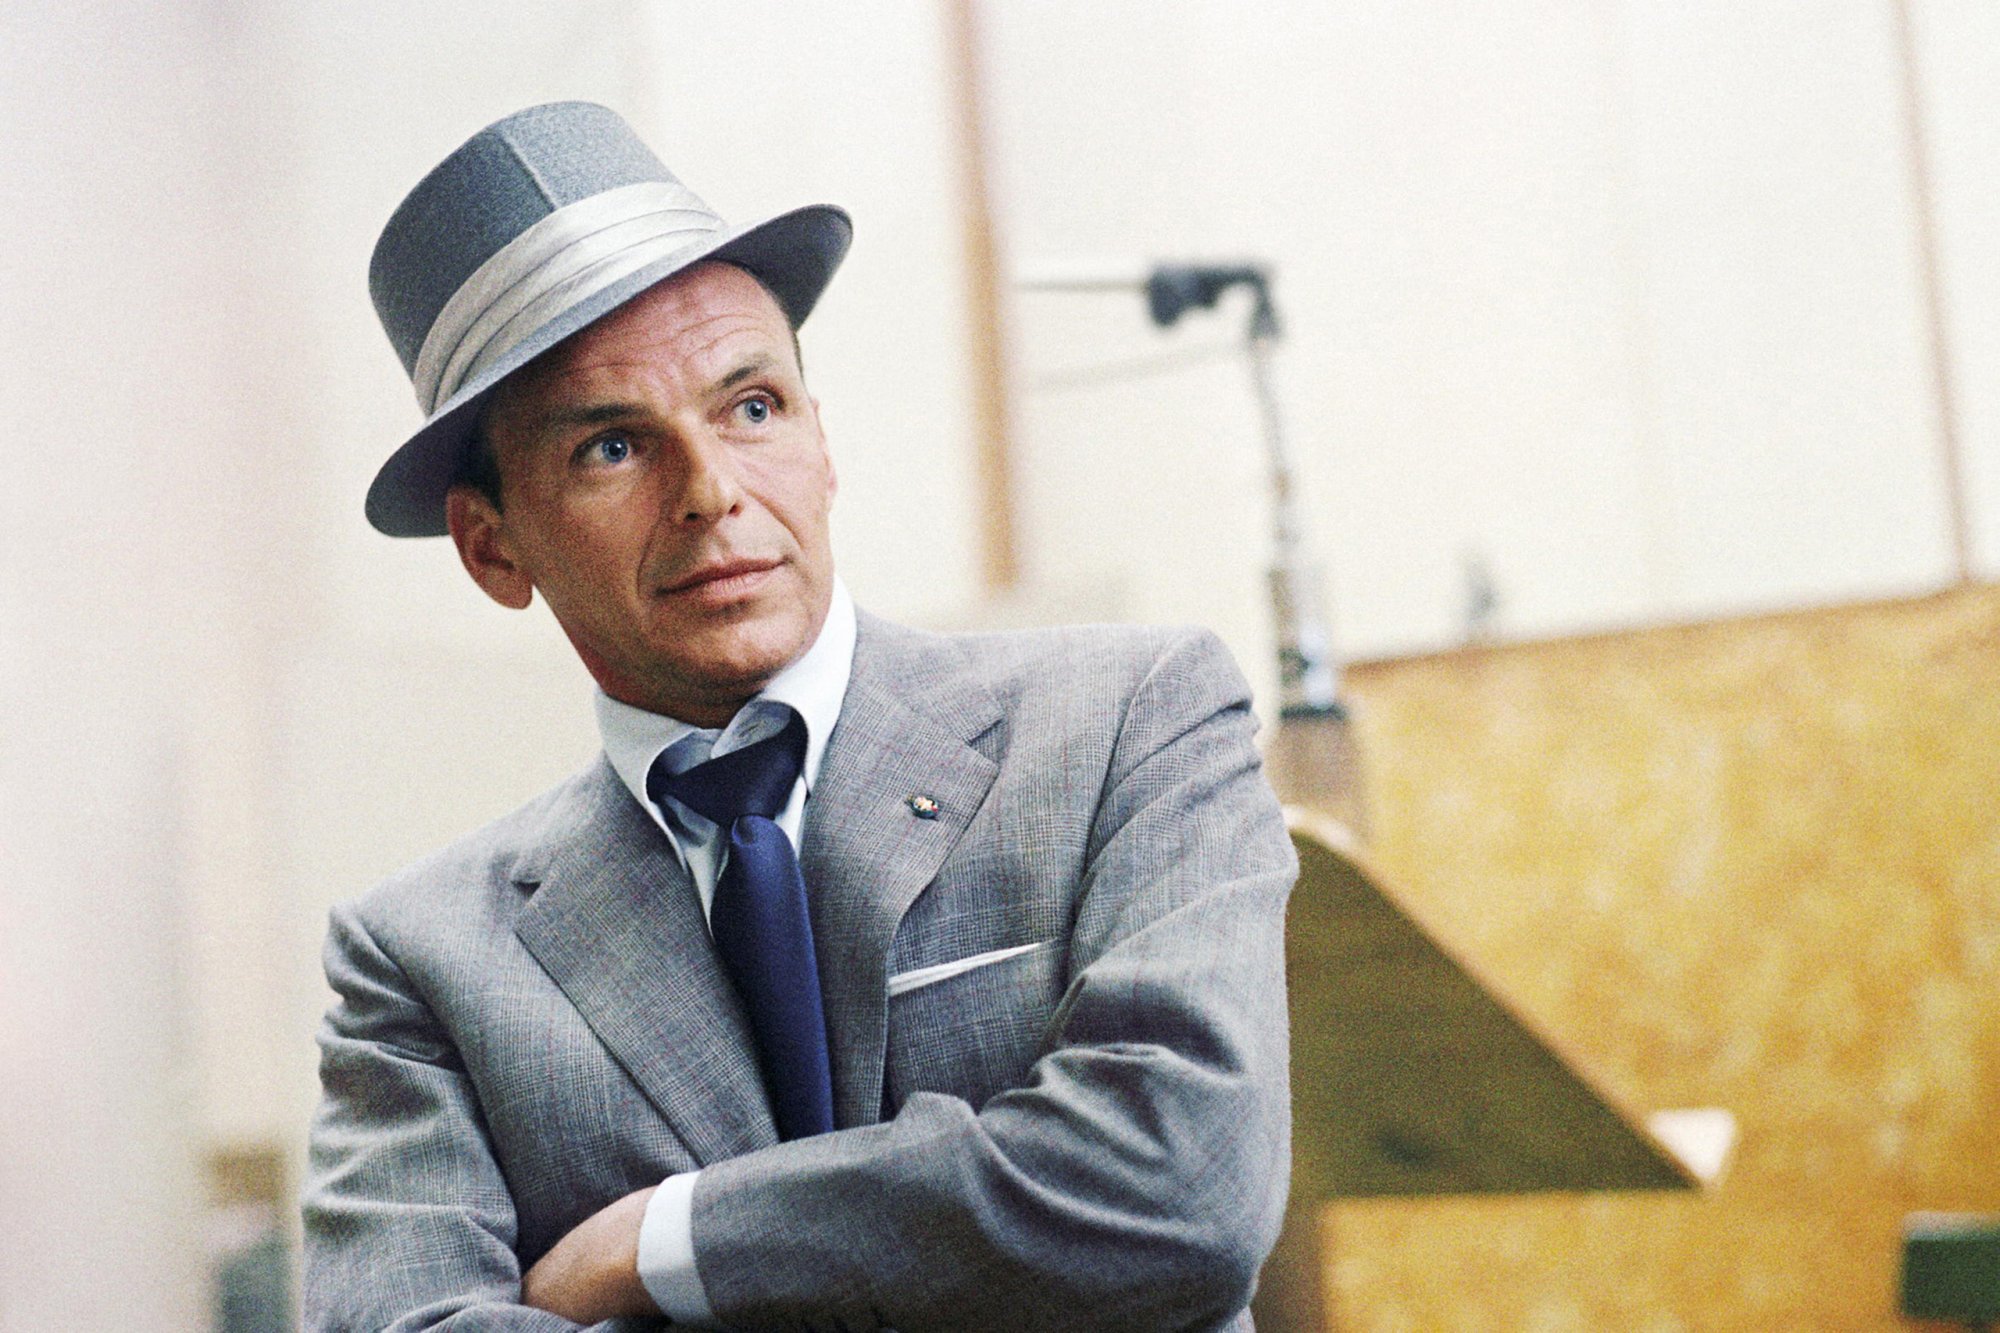 Frank Sinatra Wallpapers Images Photos Pictures Backgrounds